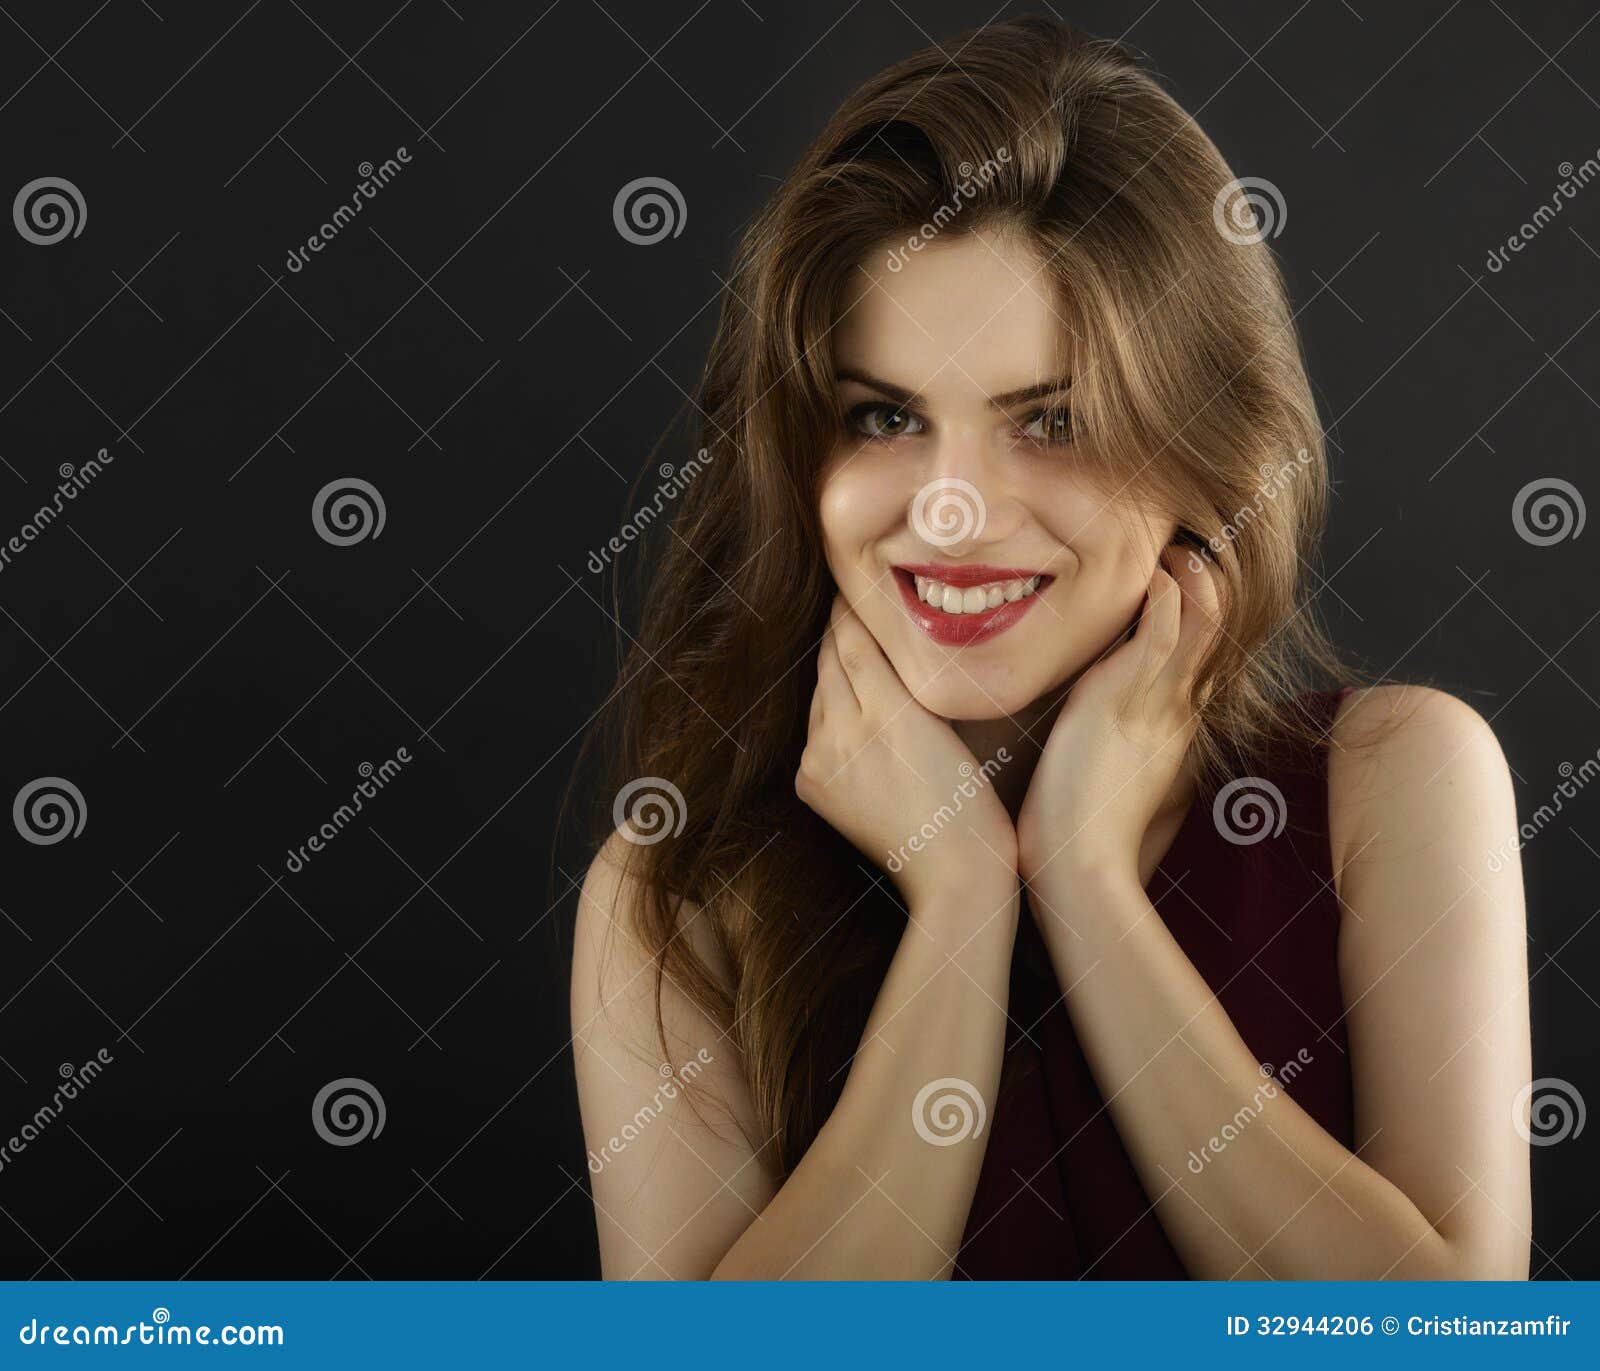 Long Hair Young Woman with Dark Makeup Stock Photo - Image of brunette ...